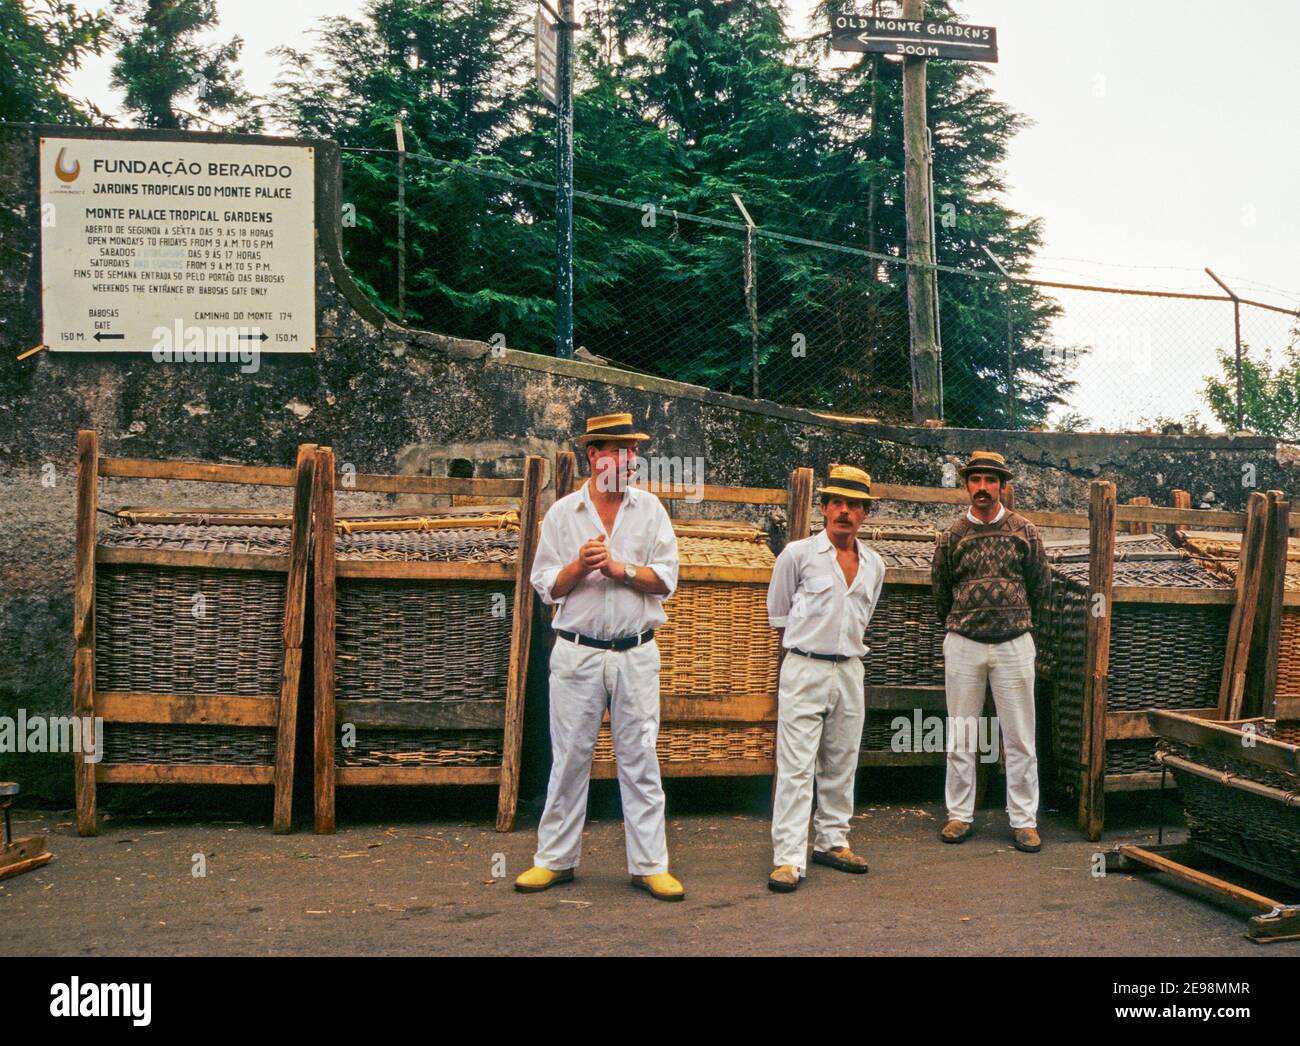 Cestinhos drivers (basket sleighs drivers) with basket sledges in Monte, Funchal, Madeira Island, Portugal Stock Photo